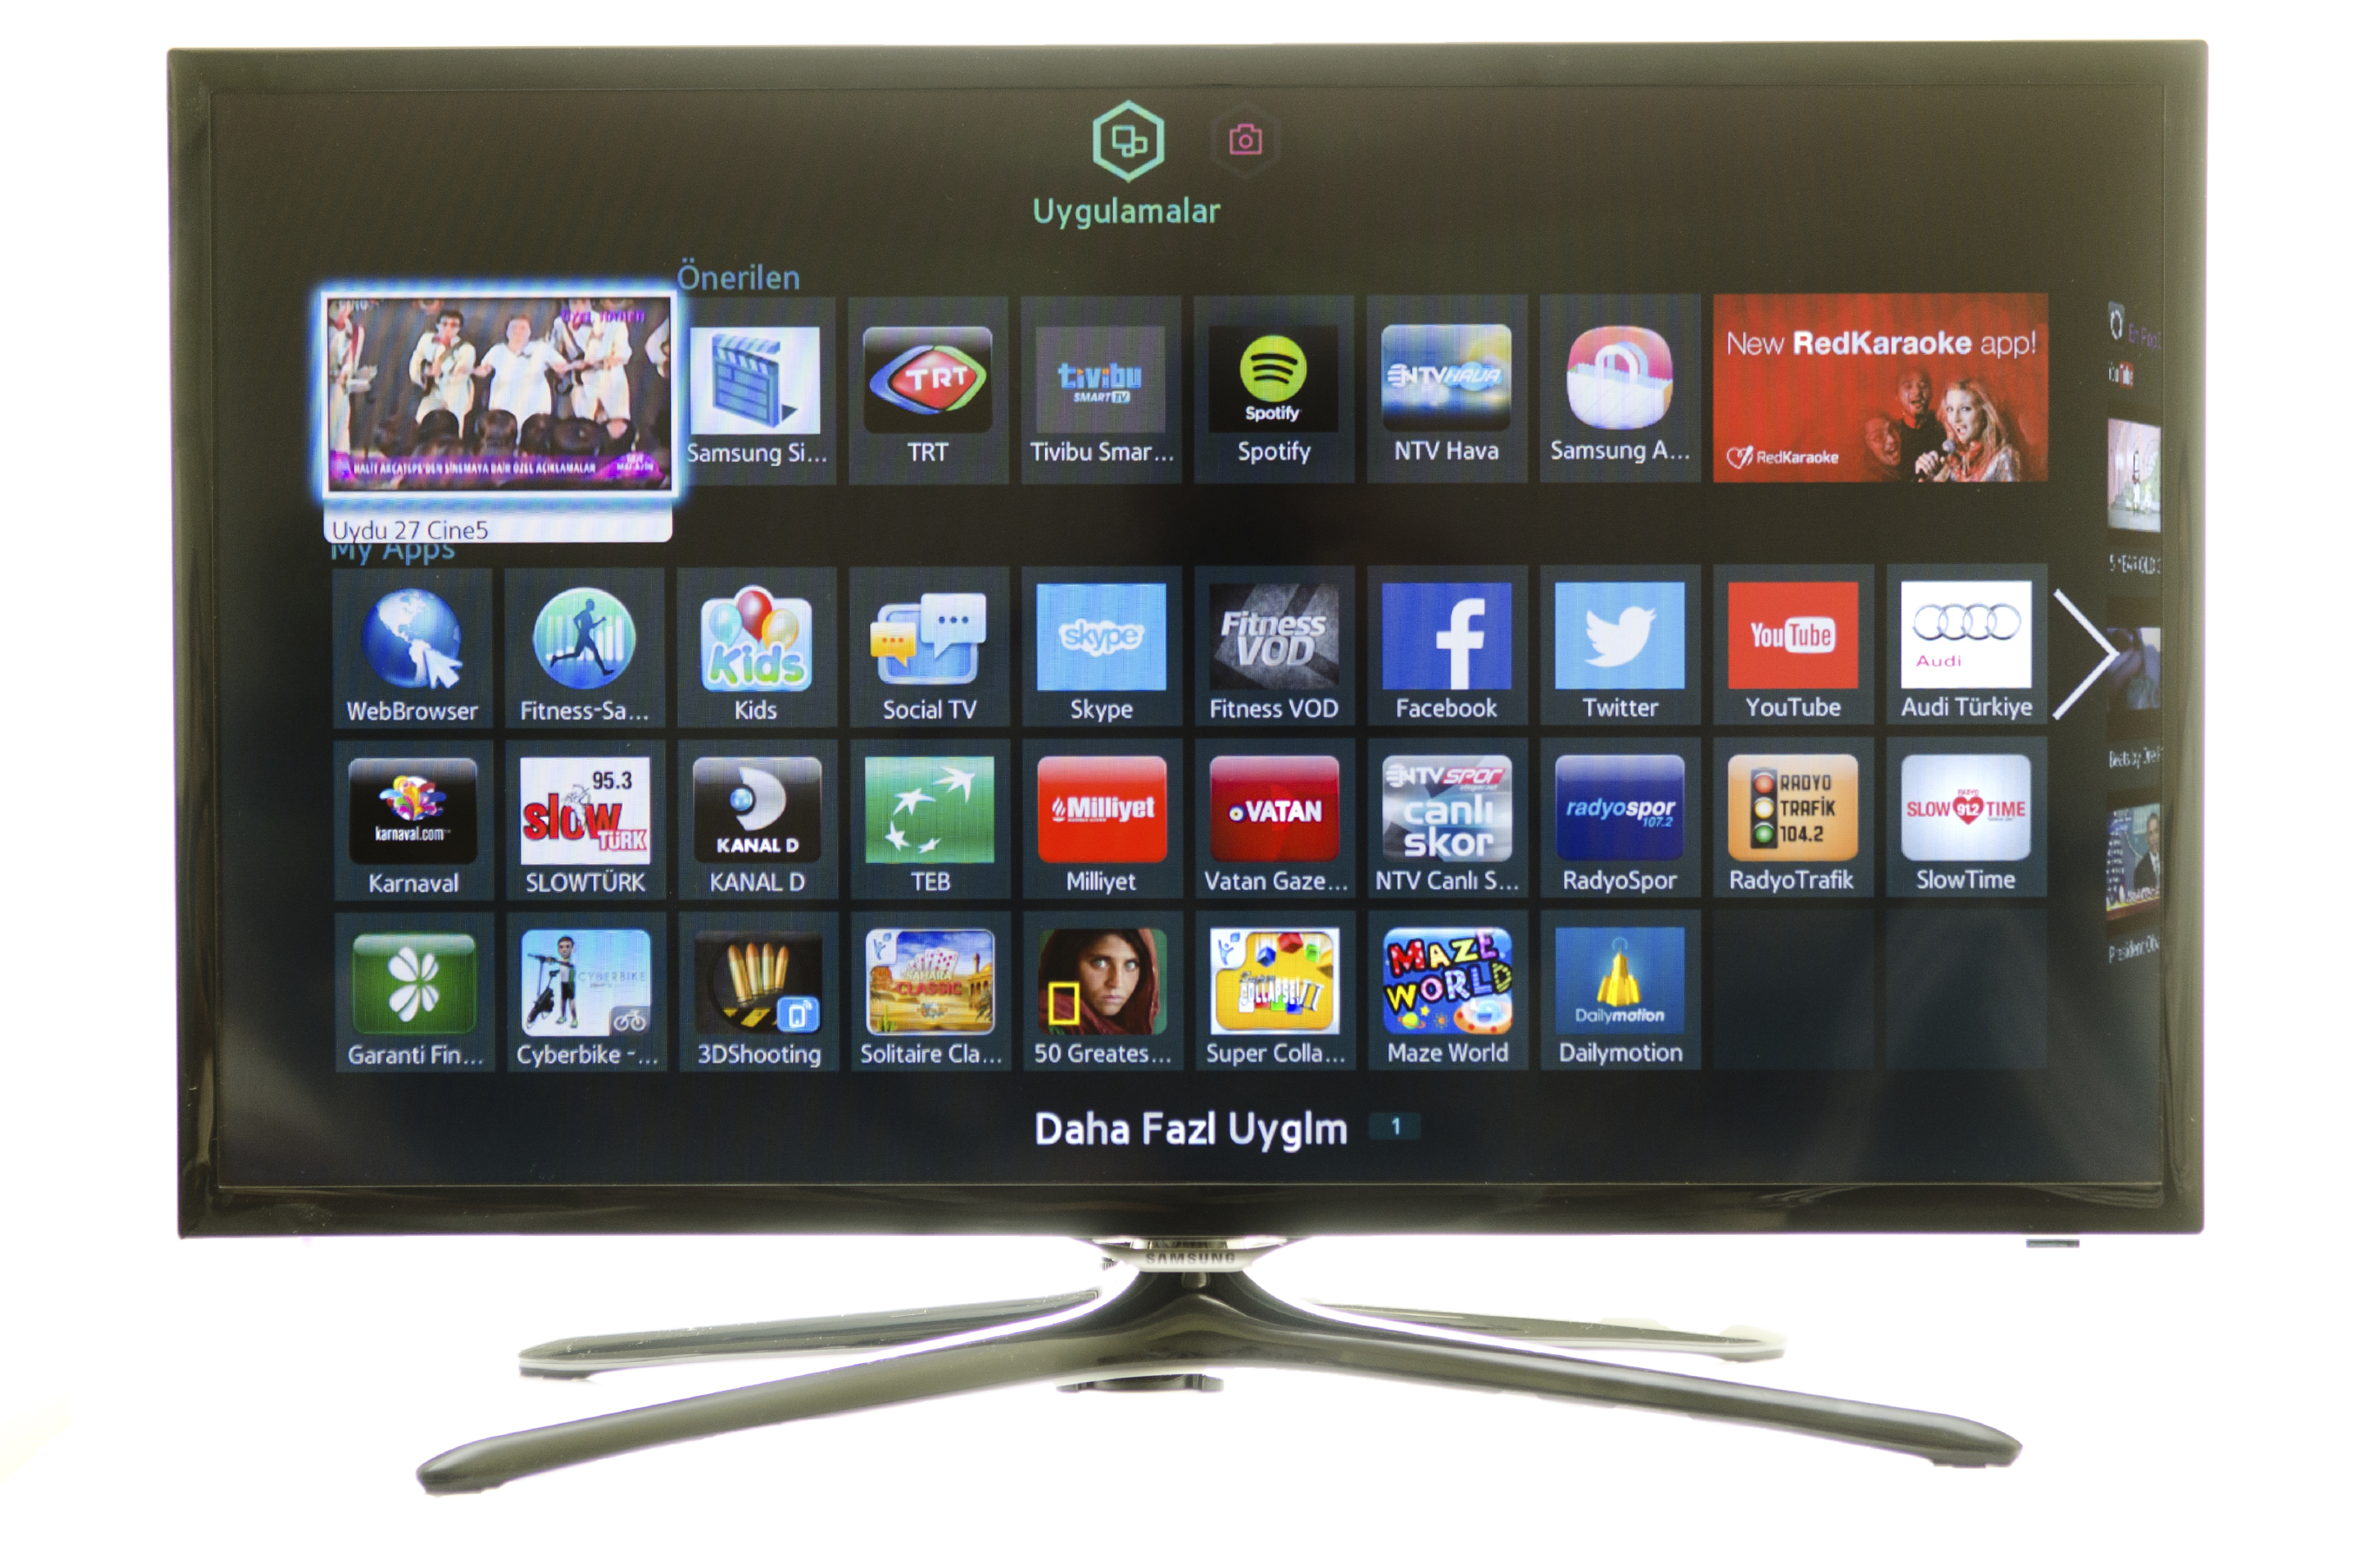 Public fears invasion of privacy by smart TVs - Peninsula Press